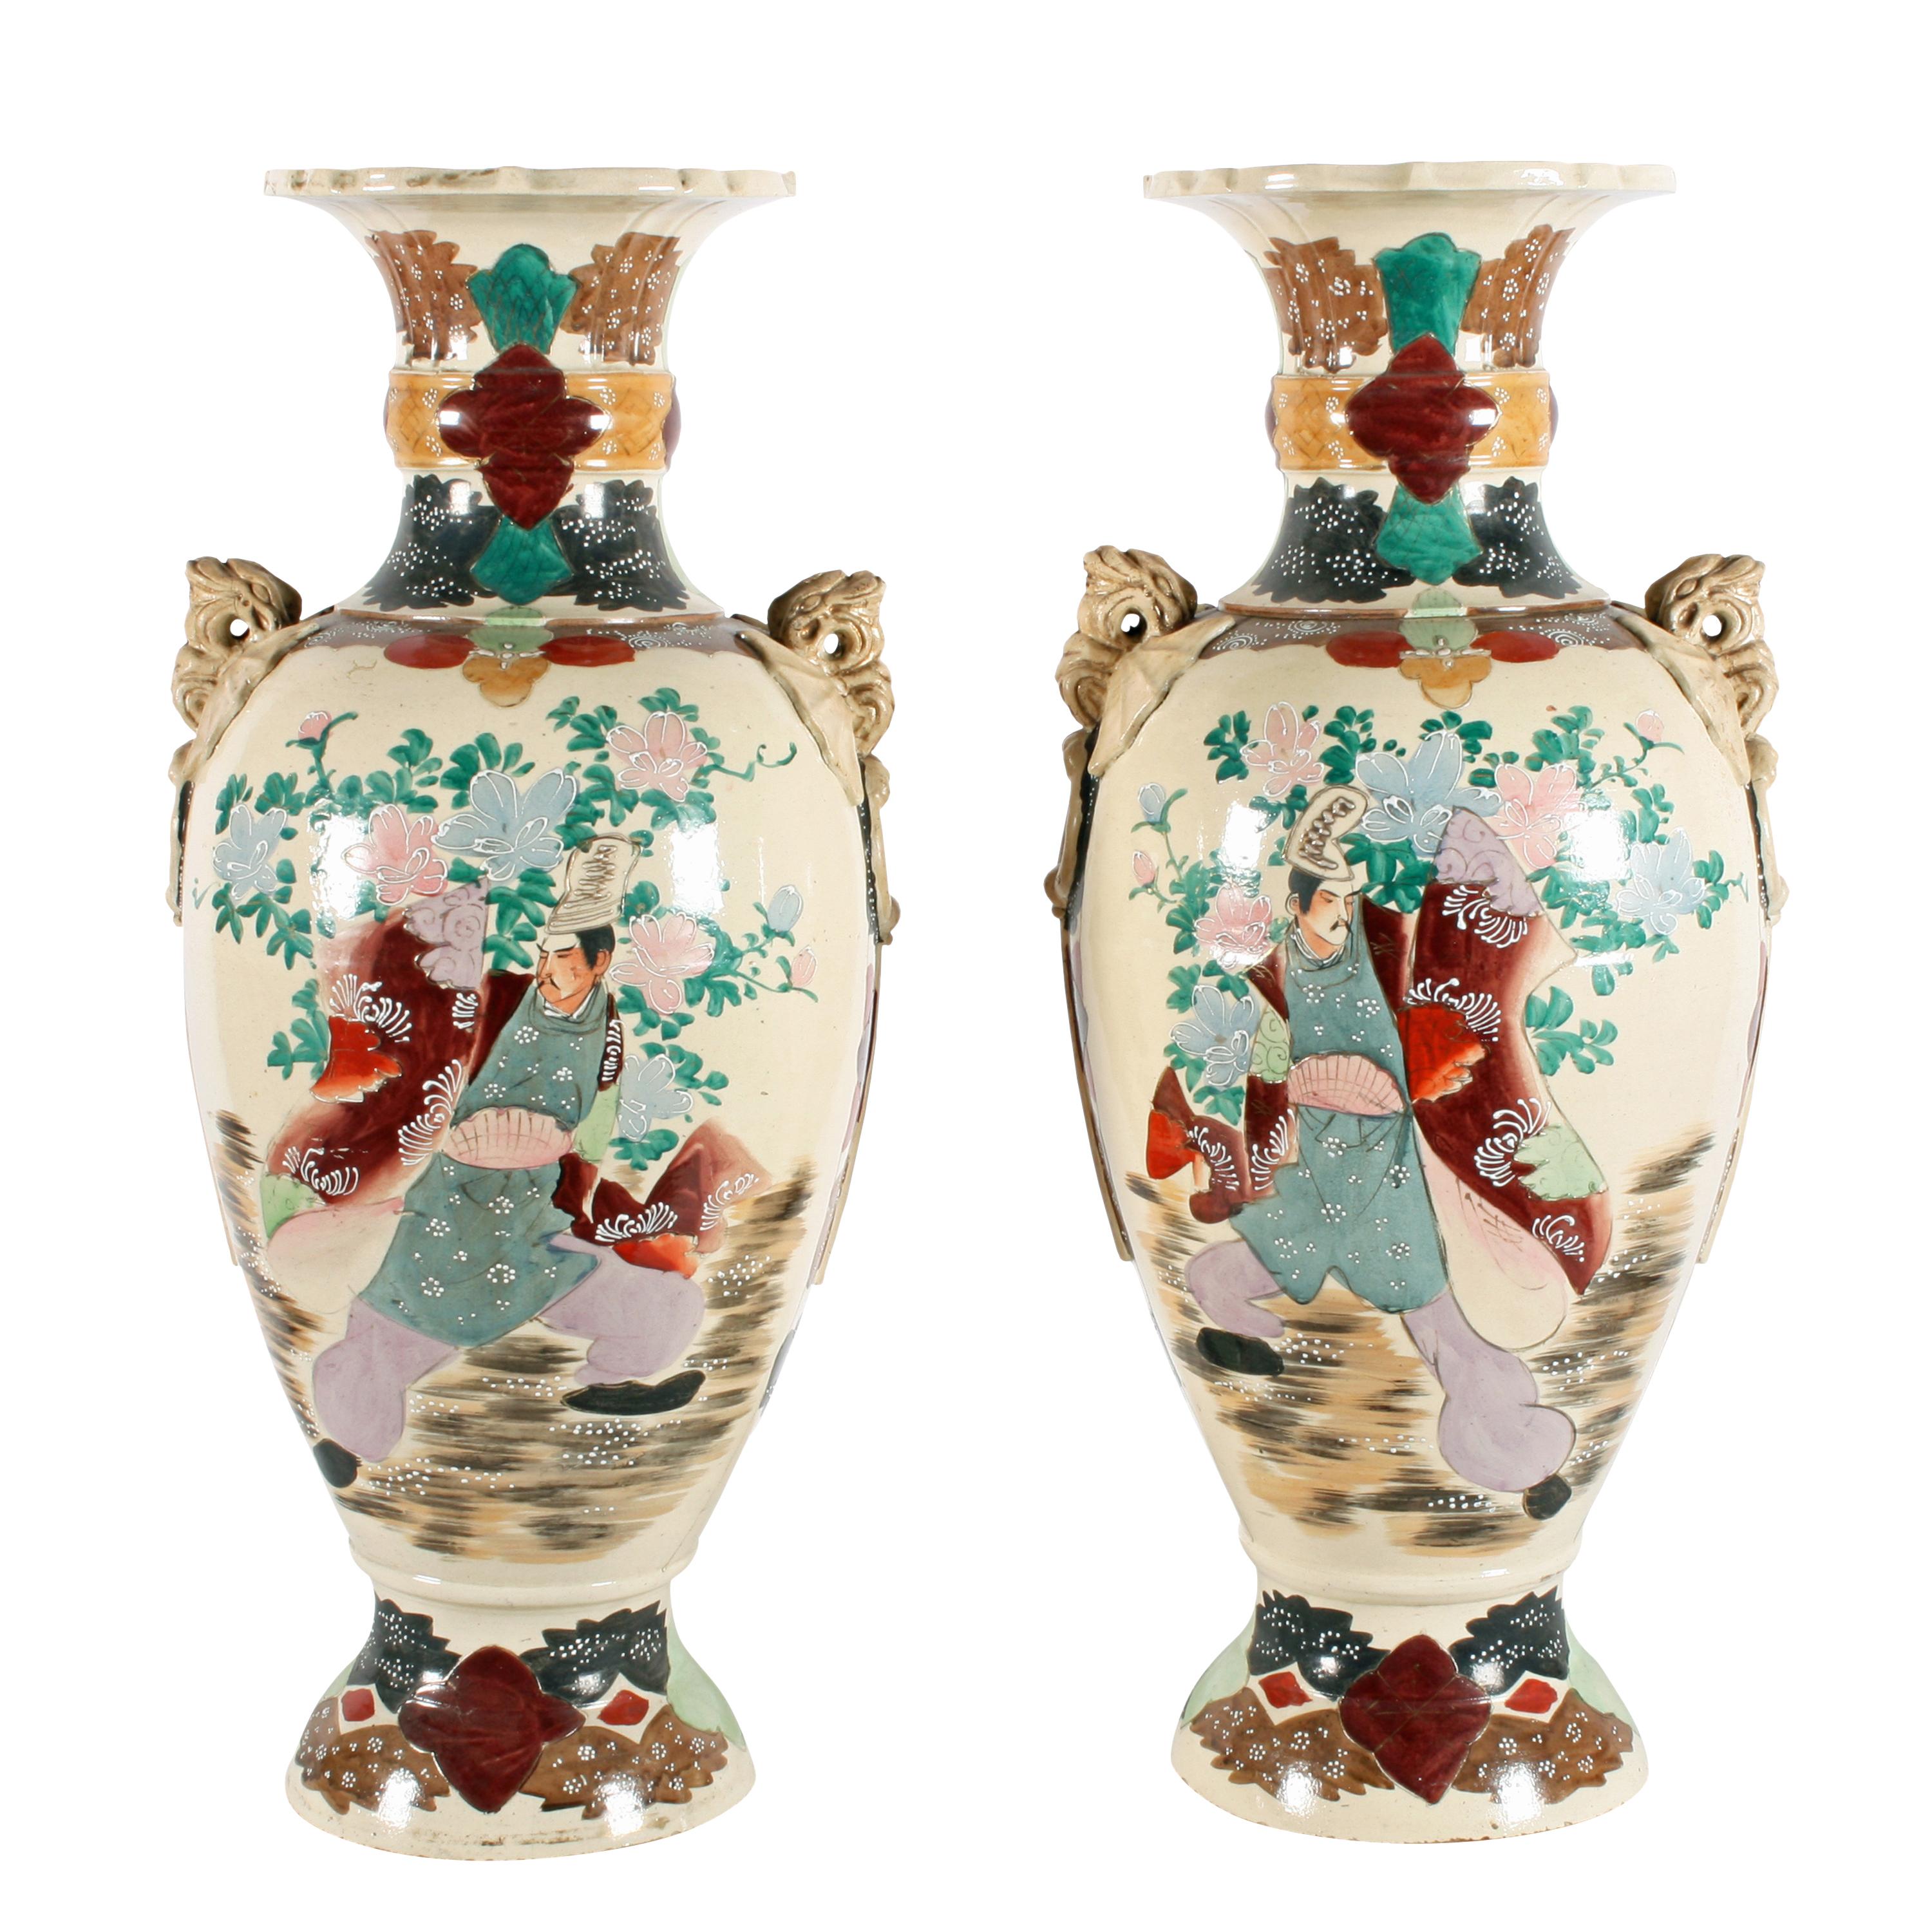 A large pair of early 20th century Japanese Satsuma pottery vases.

The vases are decorated with scenes of Samurai warriors to one side and figures in traditional dress to the other.

The shoulders of the vases have flat ring handles with dragon